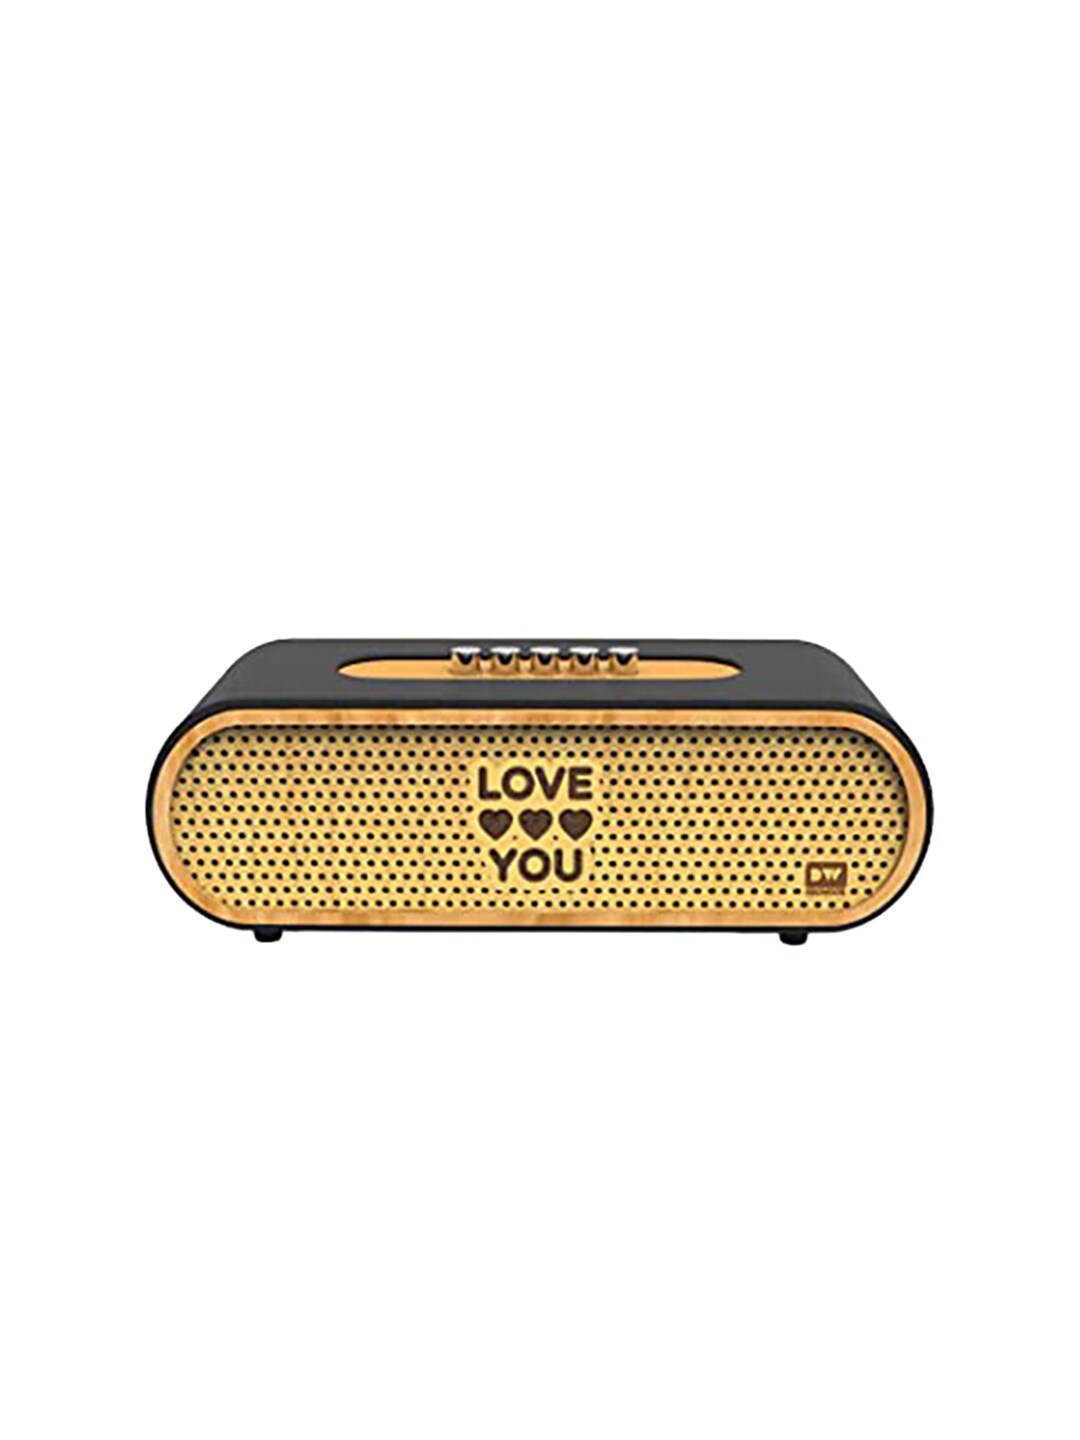 DECIWOOD Black & Beige Solid Curved 20W Wooden Portable Bluetooth Speaker Price in India